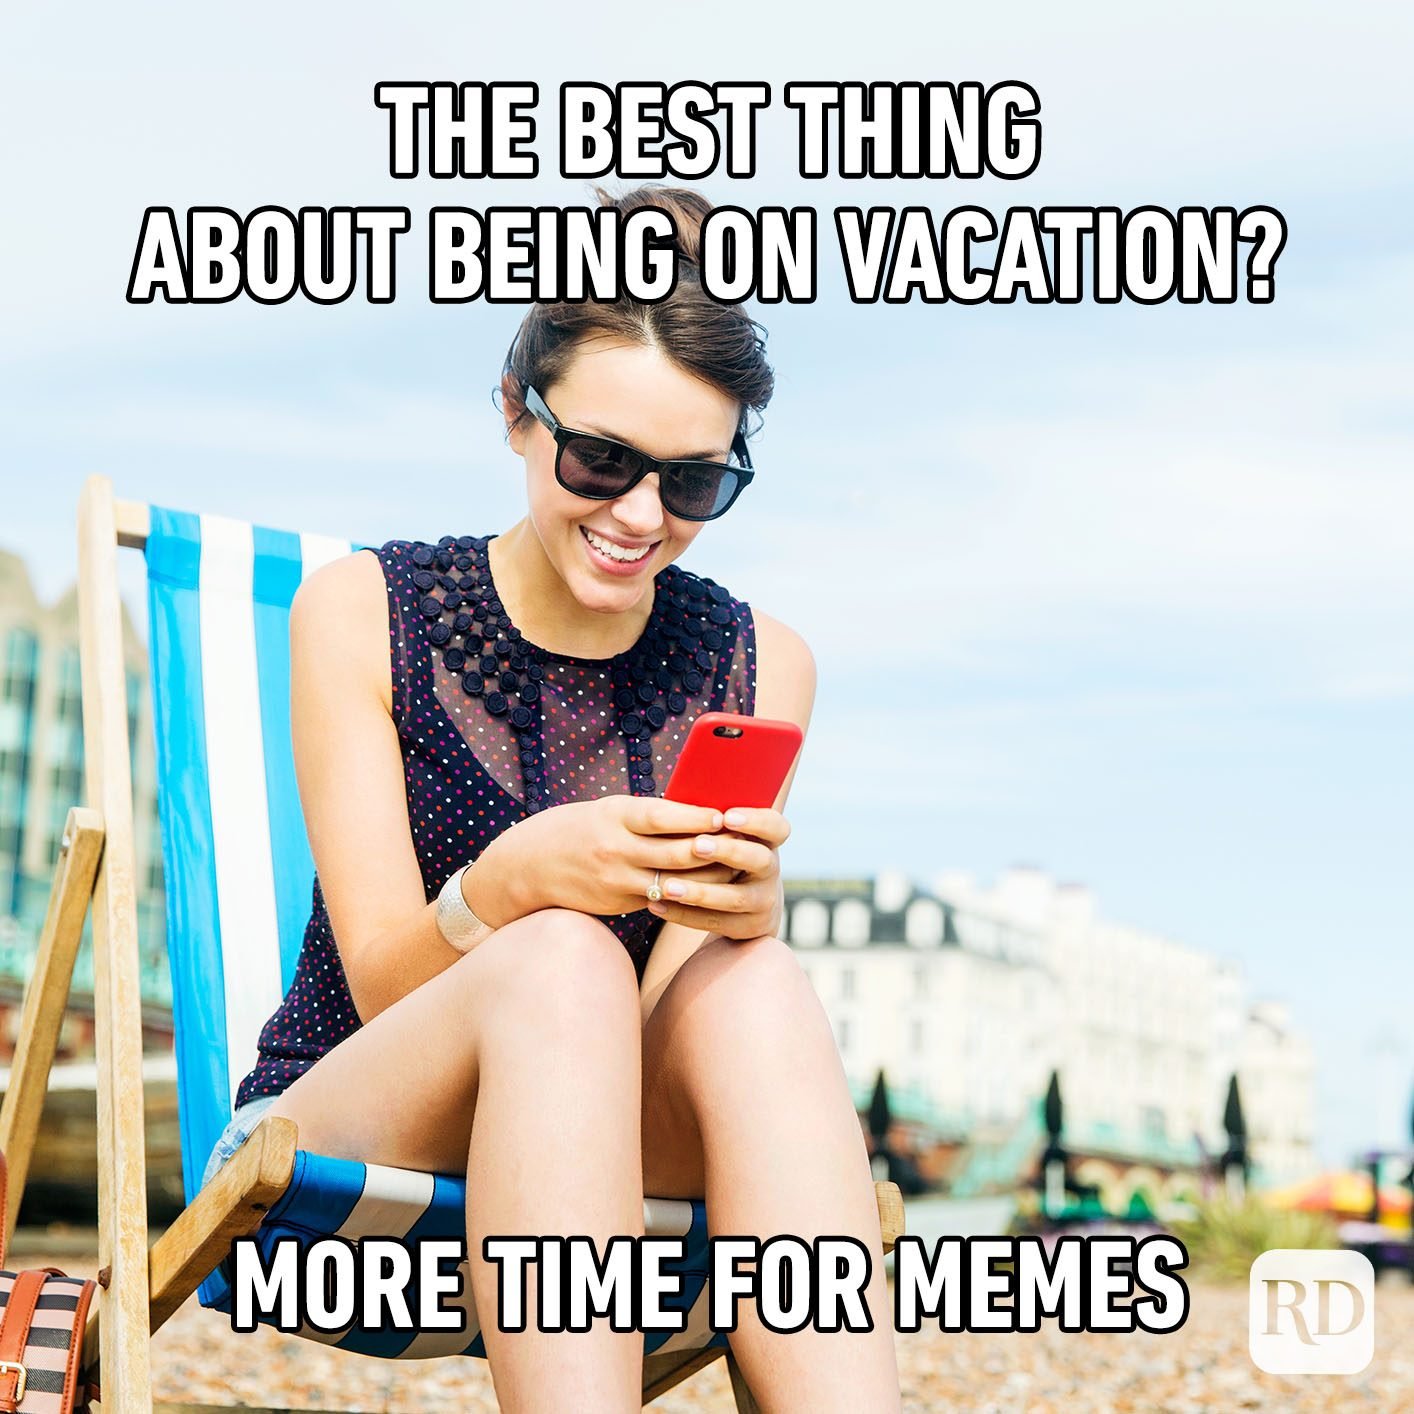 40 Funny Vacation Memes That Are Way Too Accurate | Reader's Digest